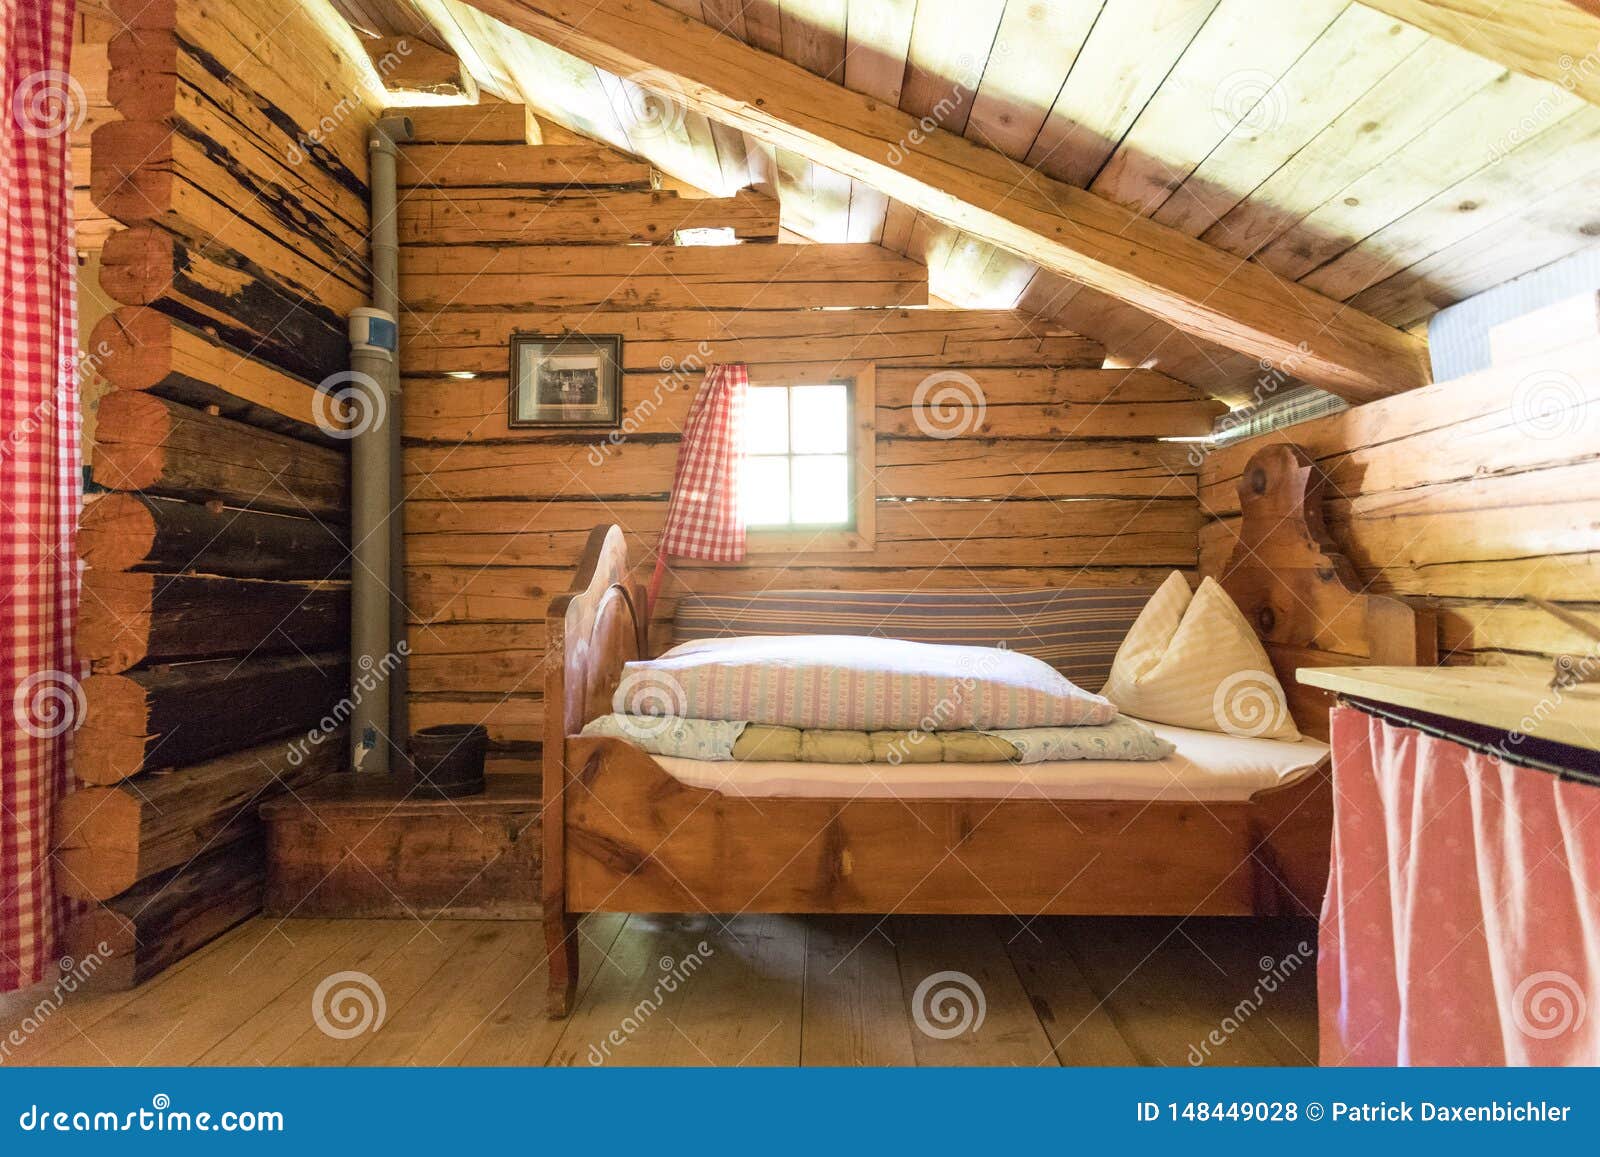 Holiday In The Mountains Rustic Old Wooden Interior Of A